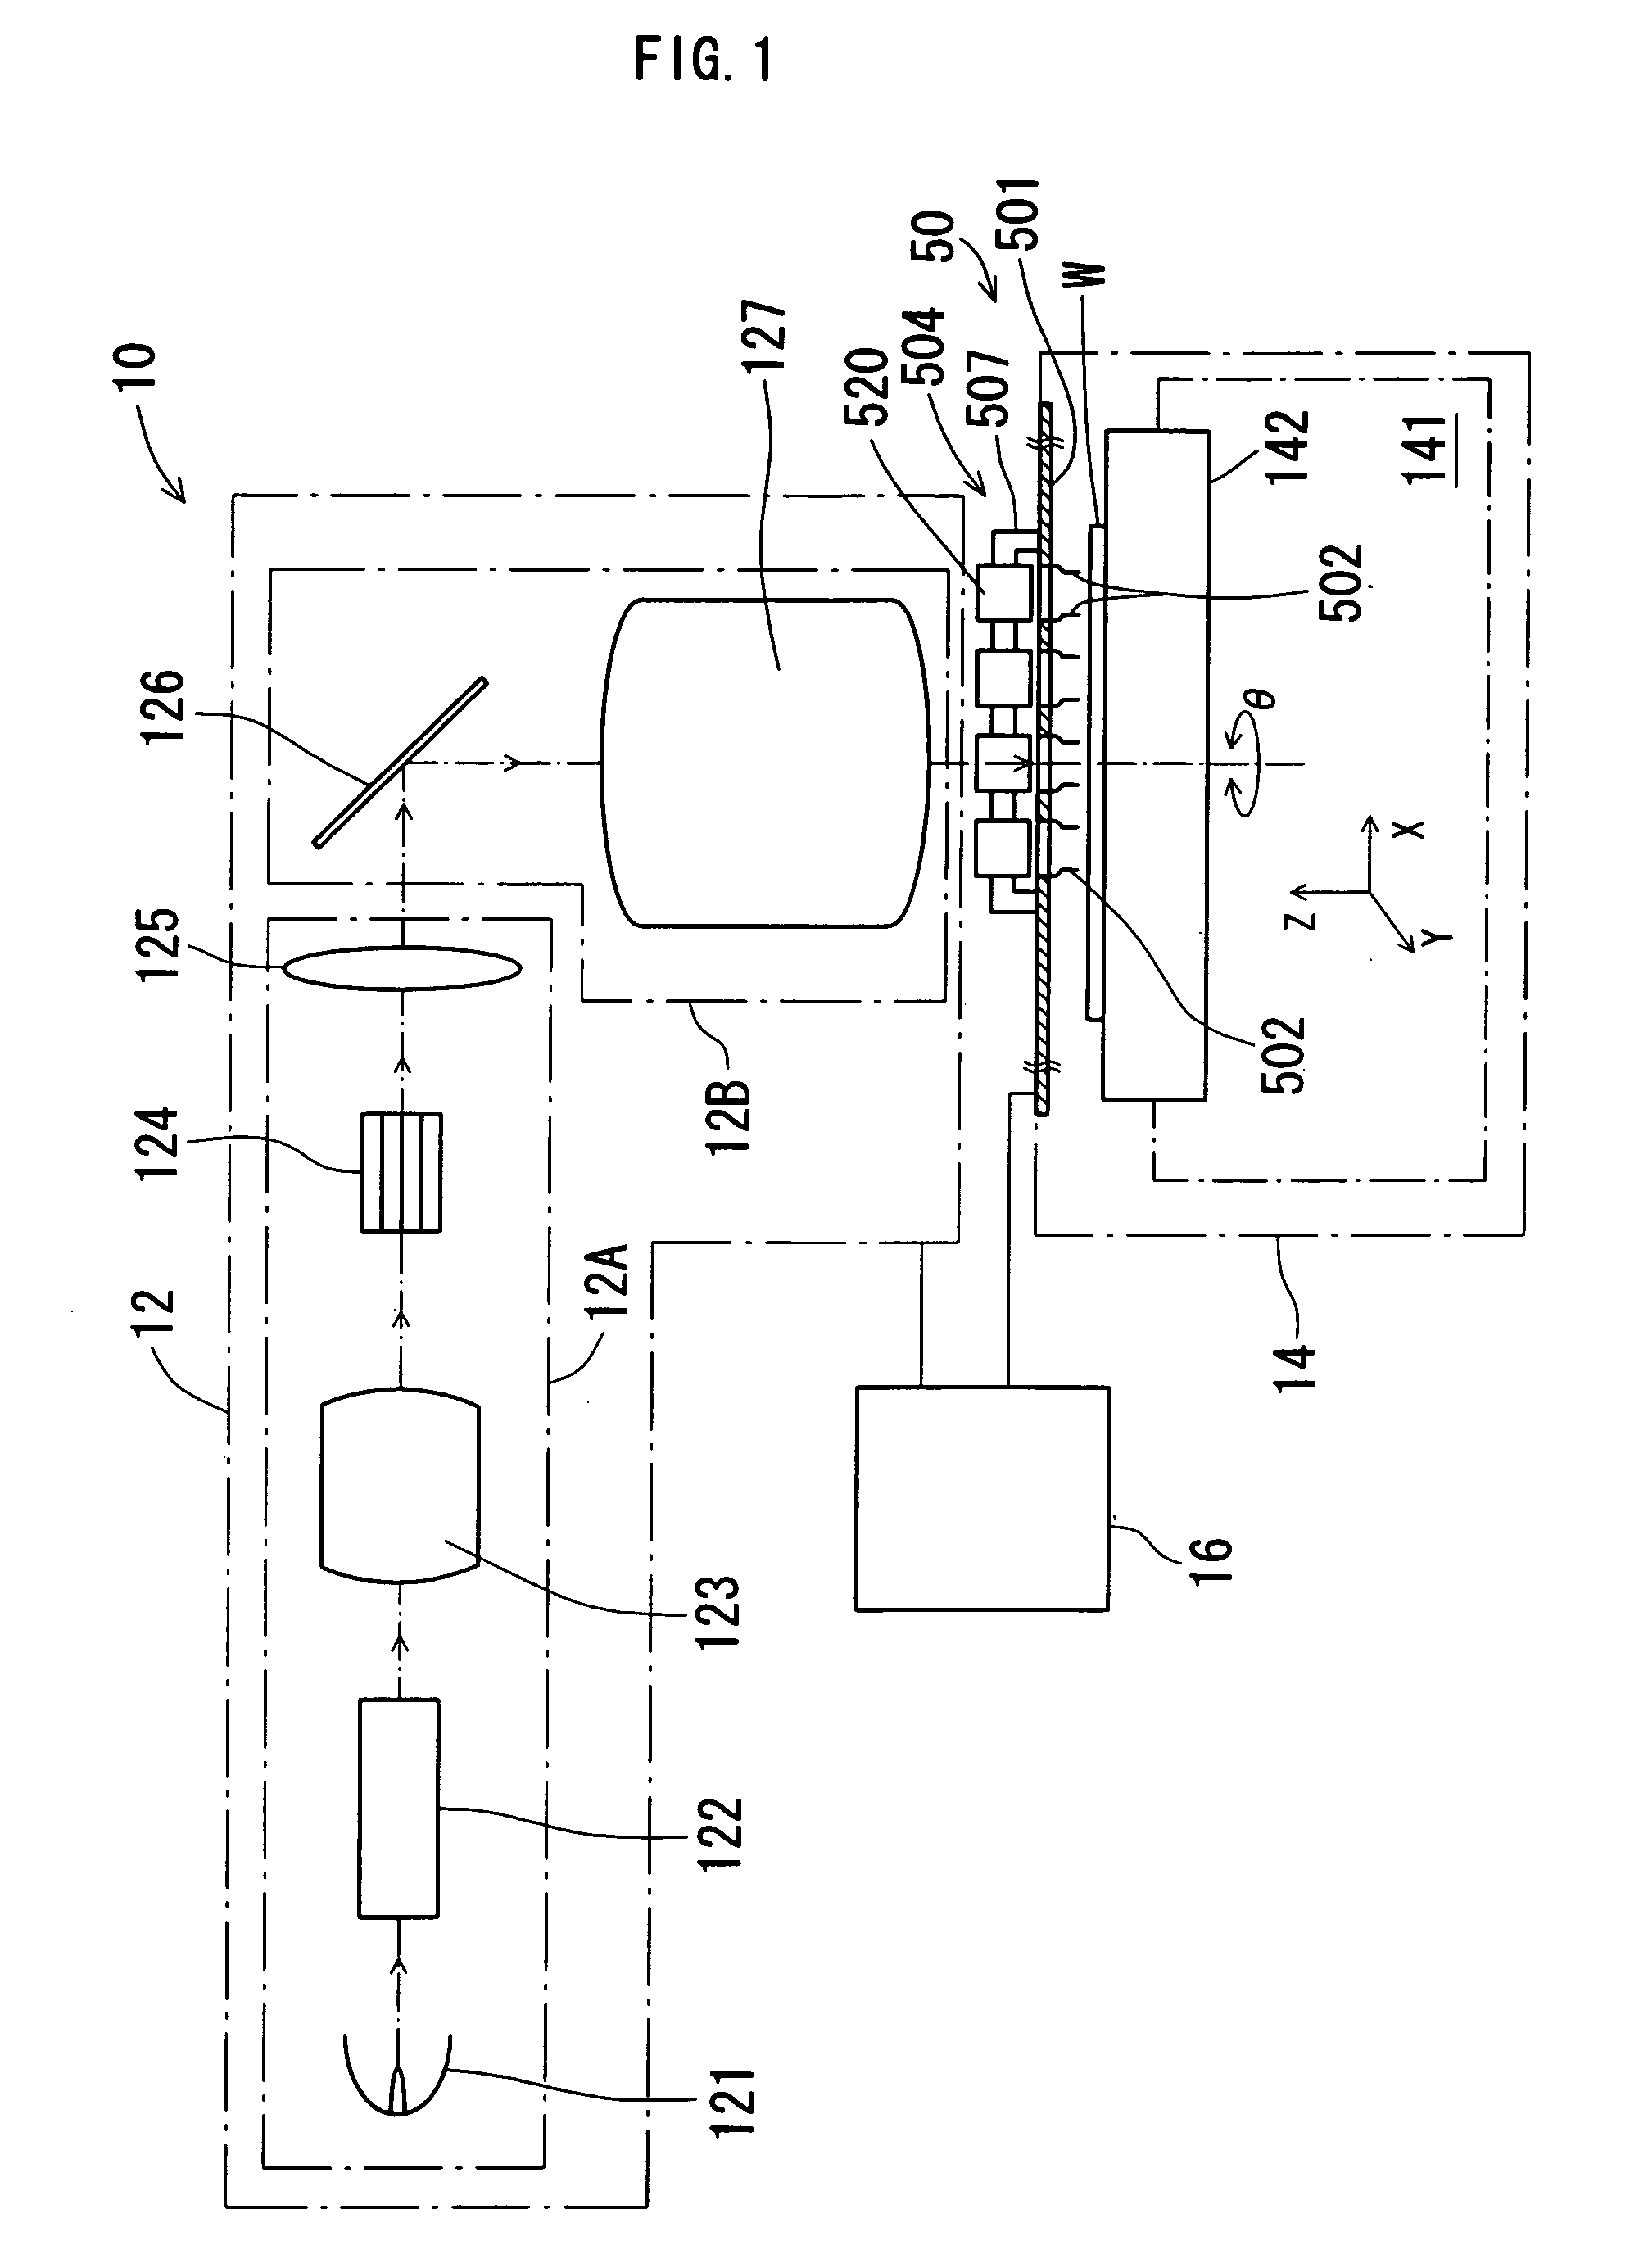 Inspection apparatus for image pickup device, optical inspection unit device, and optical inspection unit